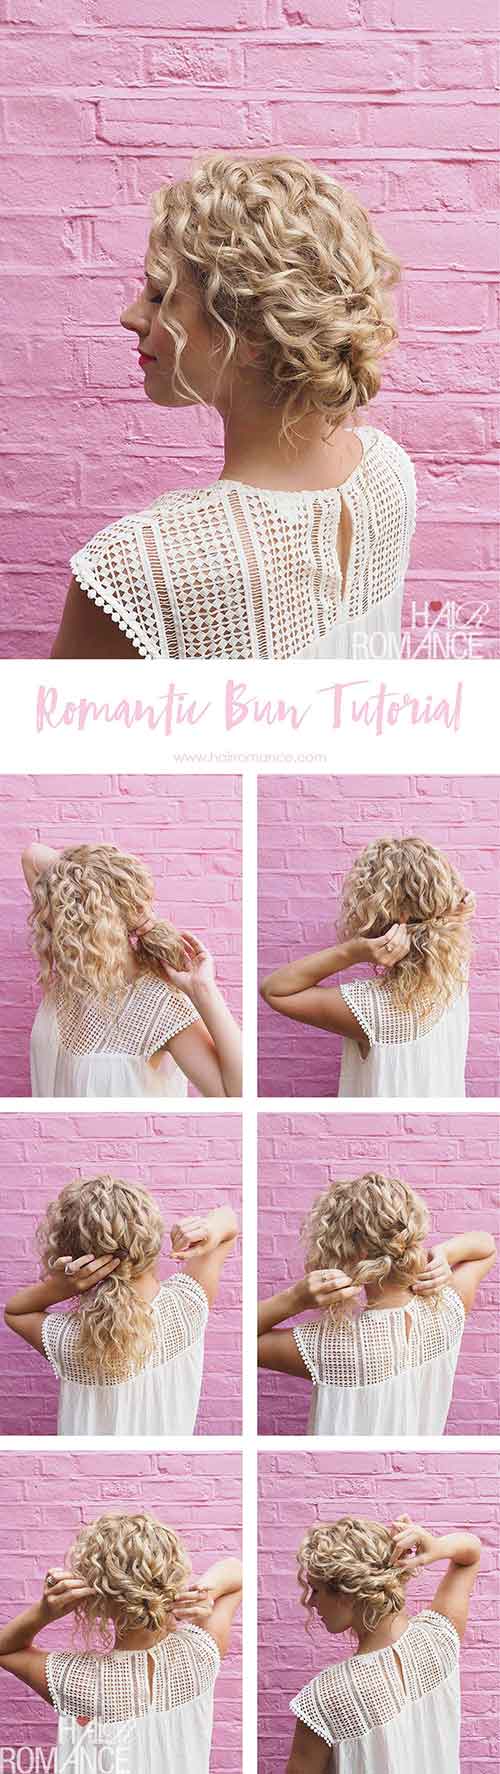 The folded ponytail updo for curly hair